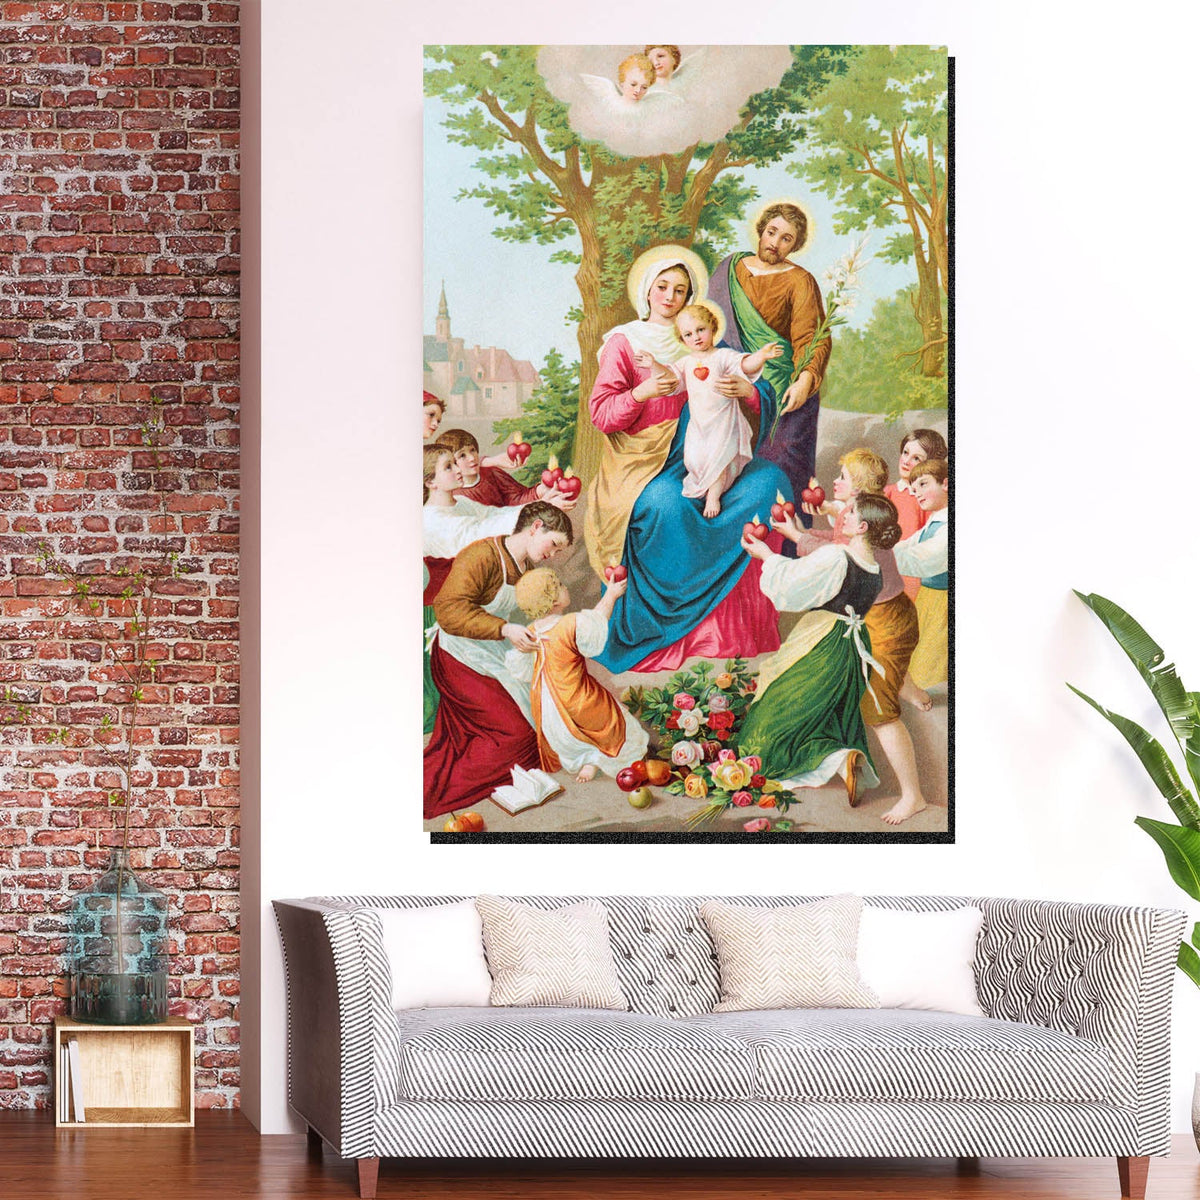 https://cdn.shopify.com/s/files/1/0387/9986/8044/products/TheBlessedHolyFamilyCanvasArtprintStretched-1.jpg